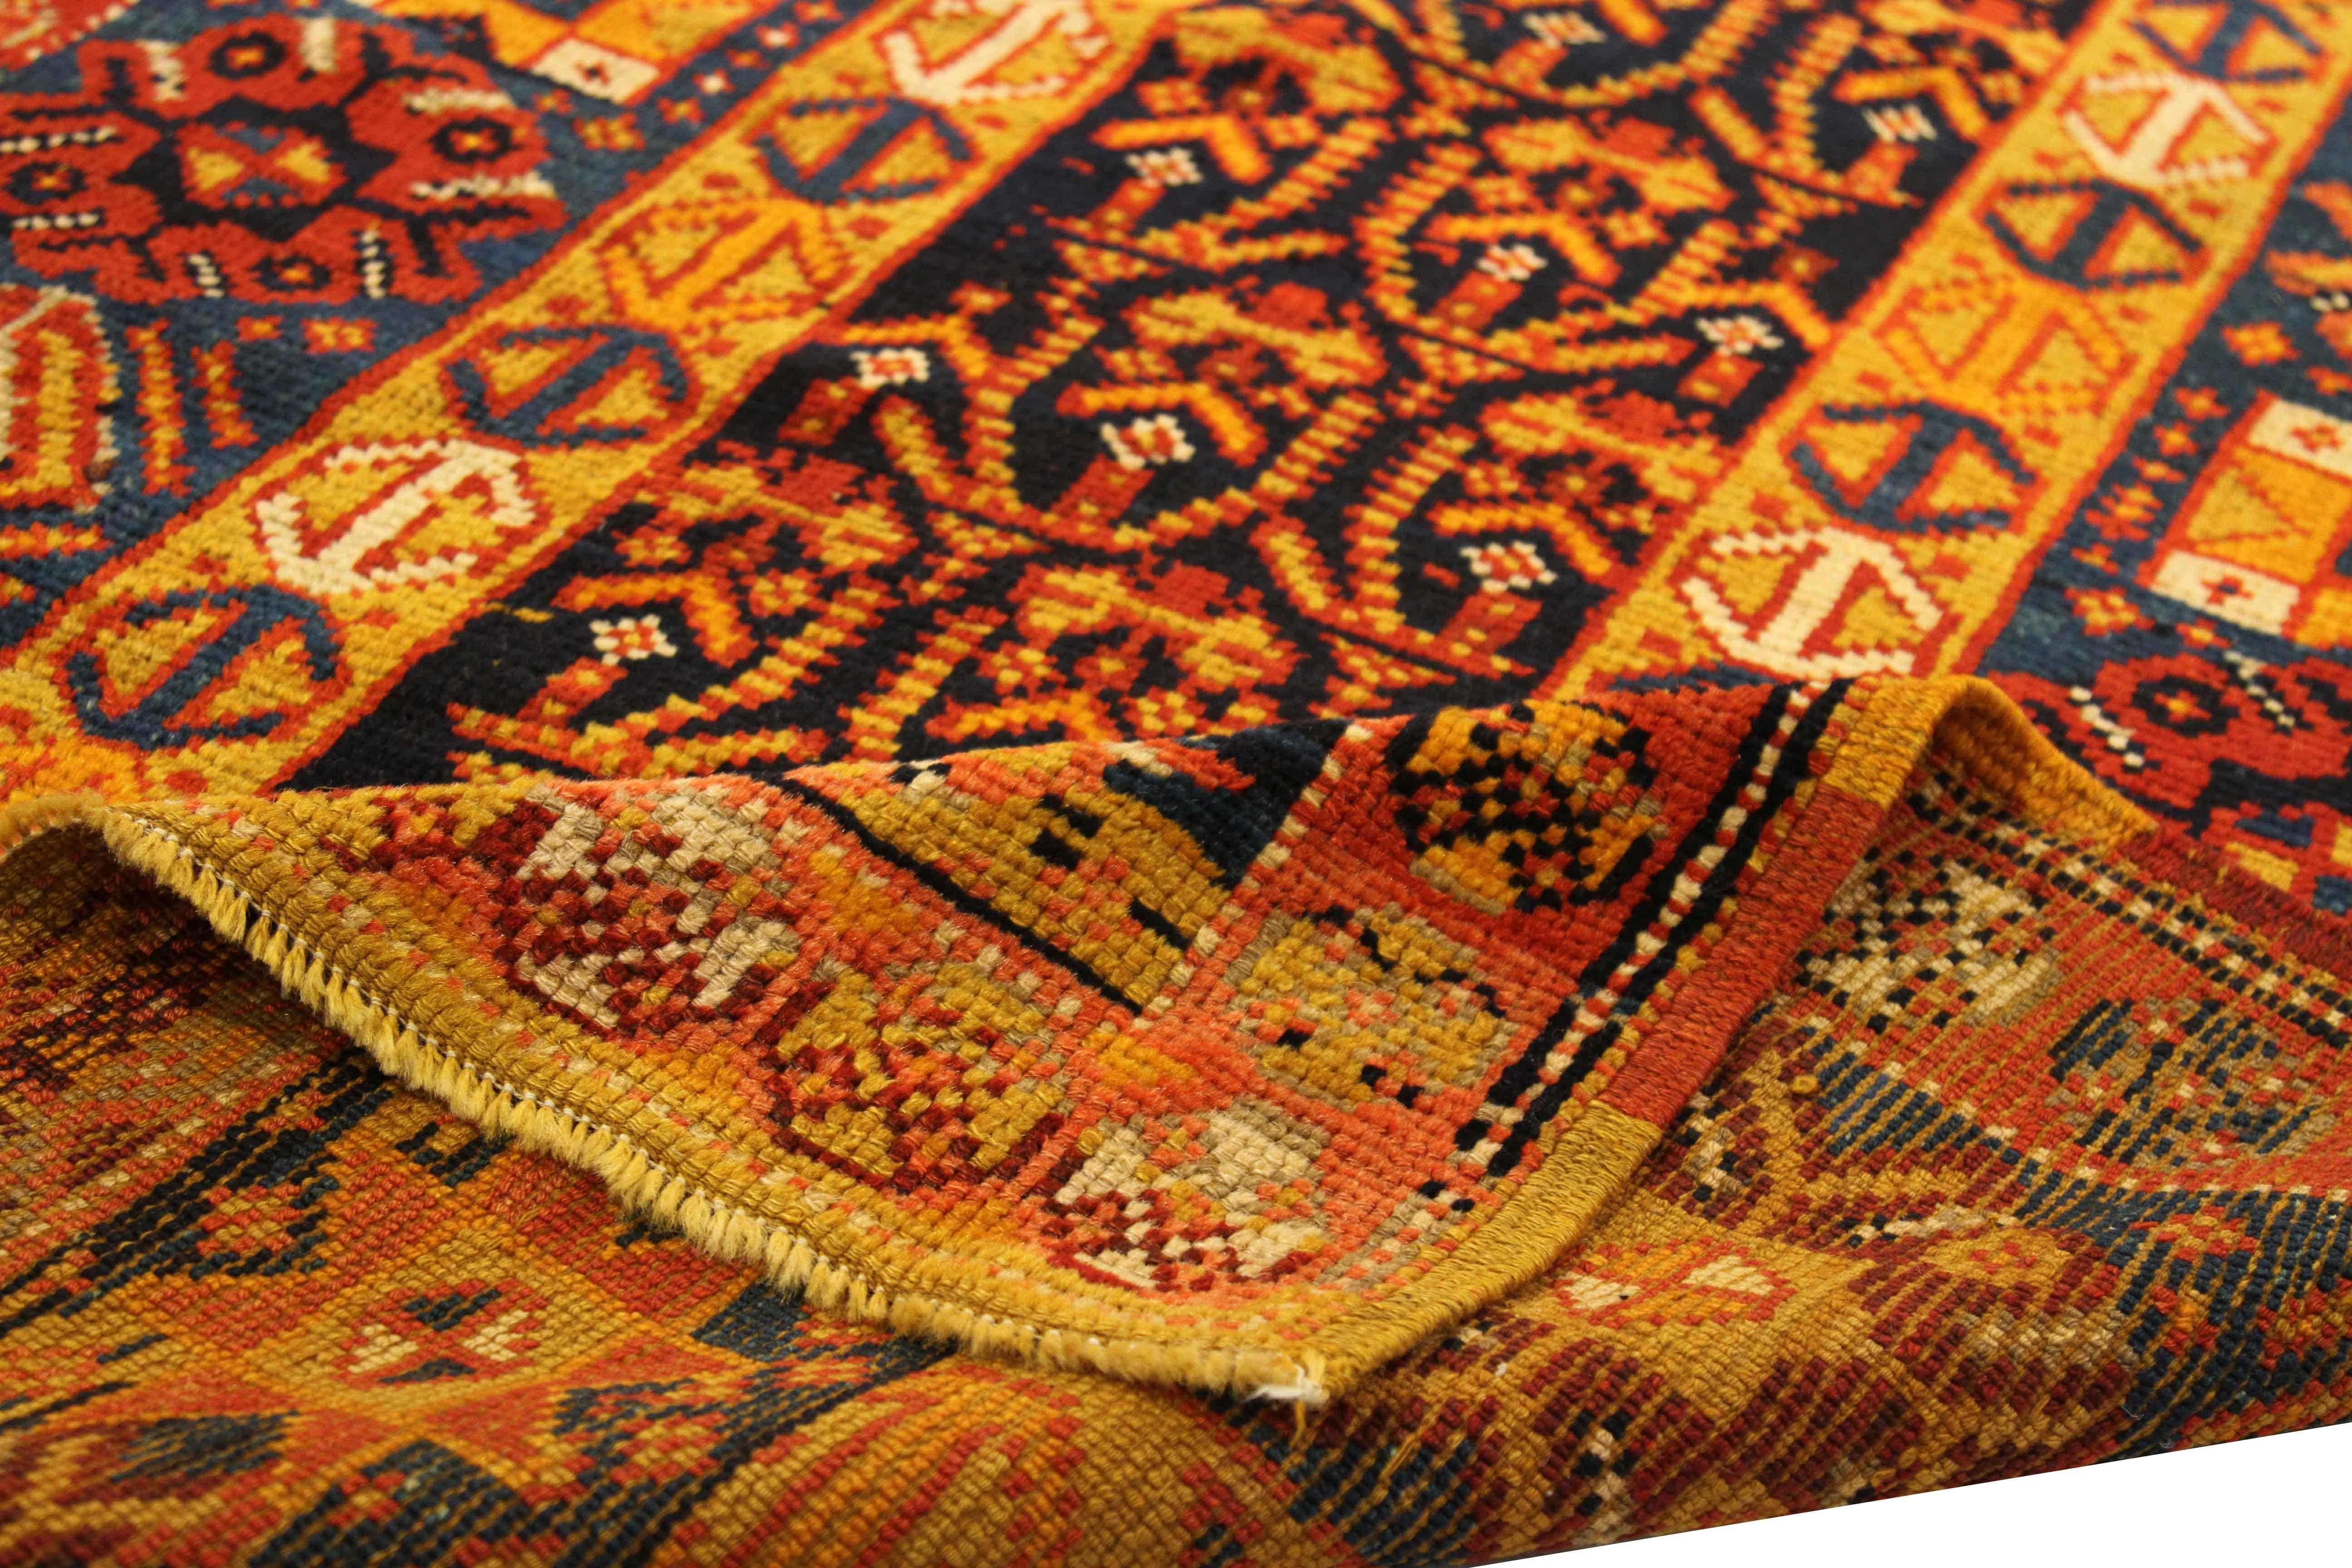 Persian Antique Turkish Oushak Rug with Stunning Geometric Patterns, circa 1910s For Sale